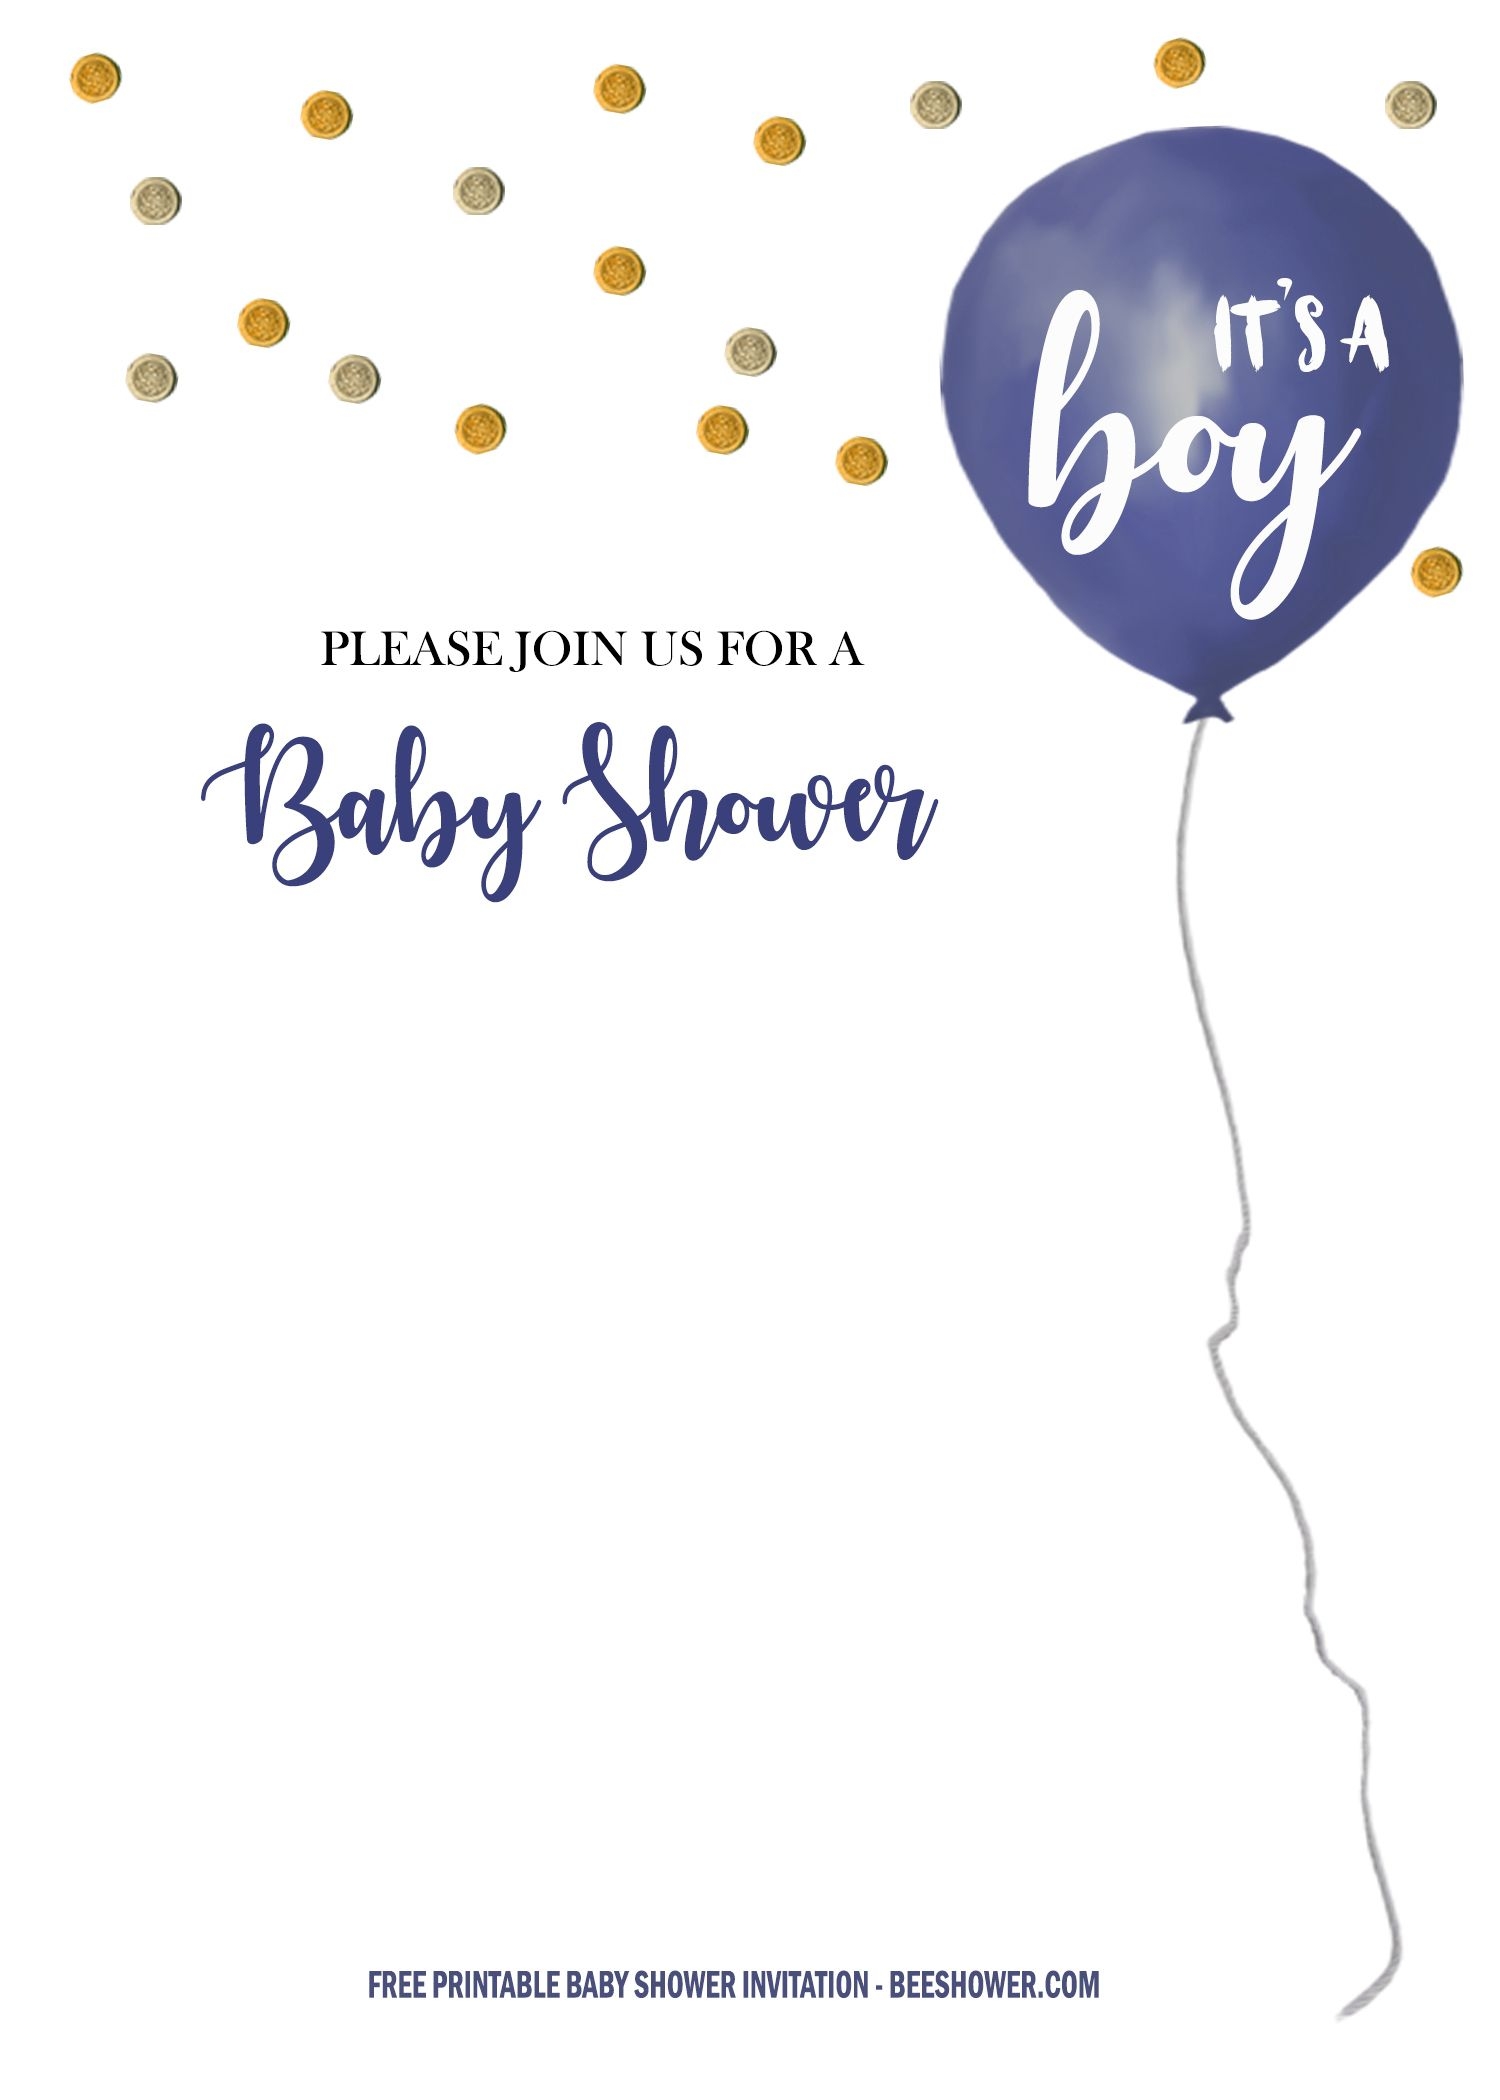 FREE It s A Boy Baby Shower Invitation Templates Boy Baby Shower Invitations Templates Printable Baby Shower Invitations Free Printable Baby Shower Invitations - Free Printable Baby Shower Invitations Templates For Boys